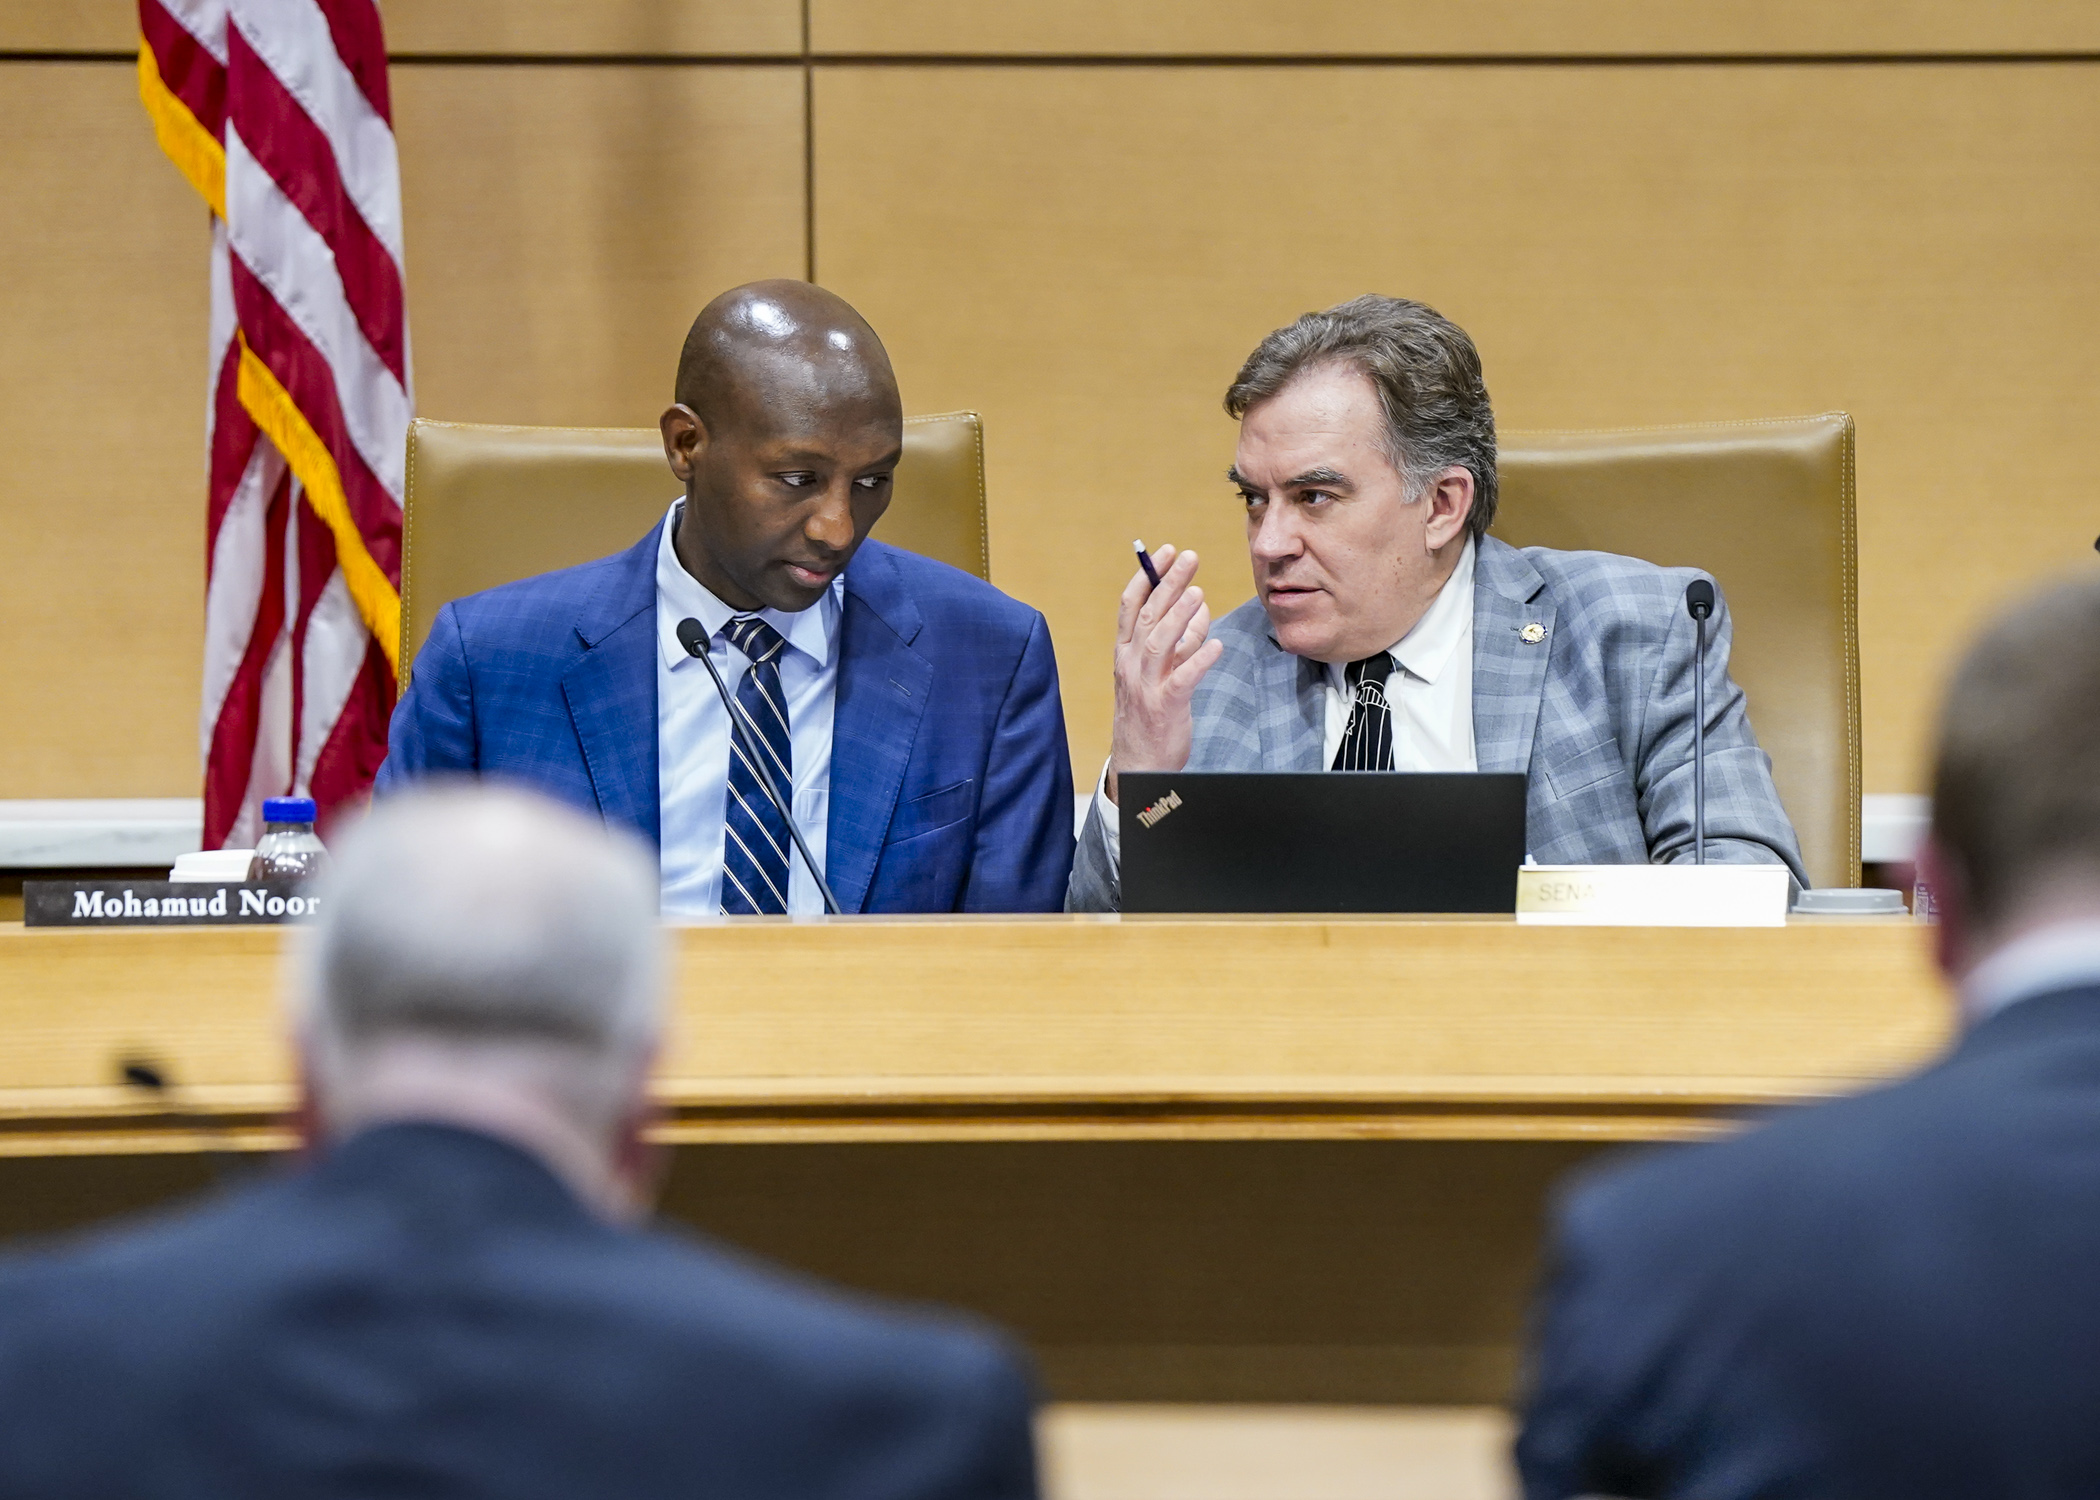 Rep. Mohamud Noor and Sen. John Hoffman discuss matters during a May 2 walkthrough of the bills before the omnibus human services finance conference committee. (Photo by Catherine Davis)